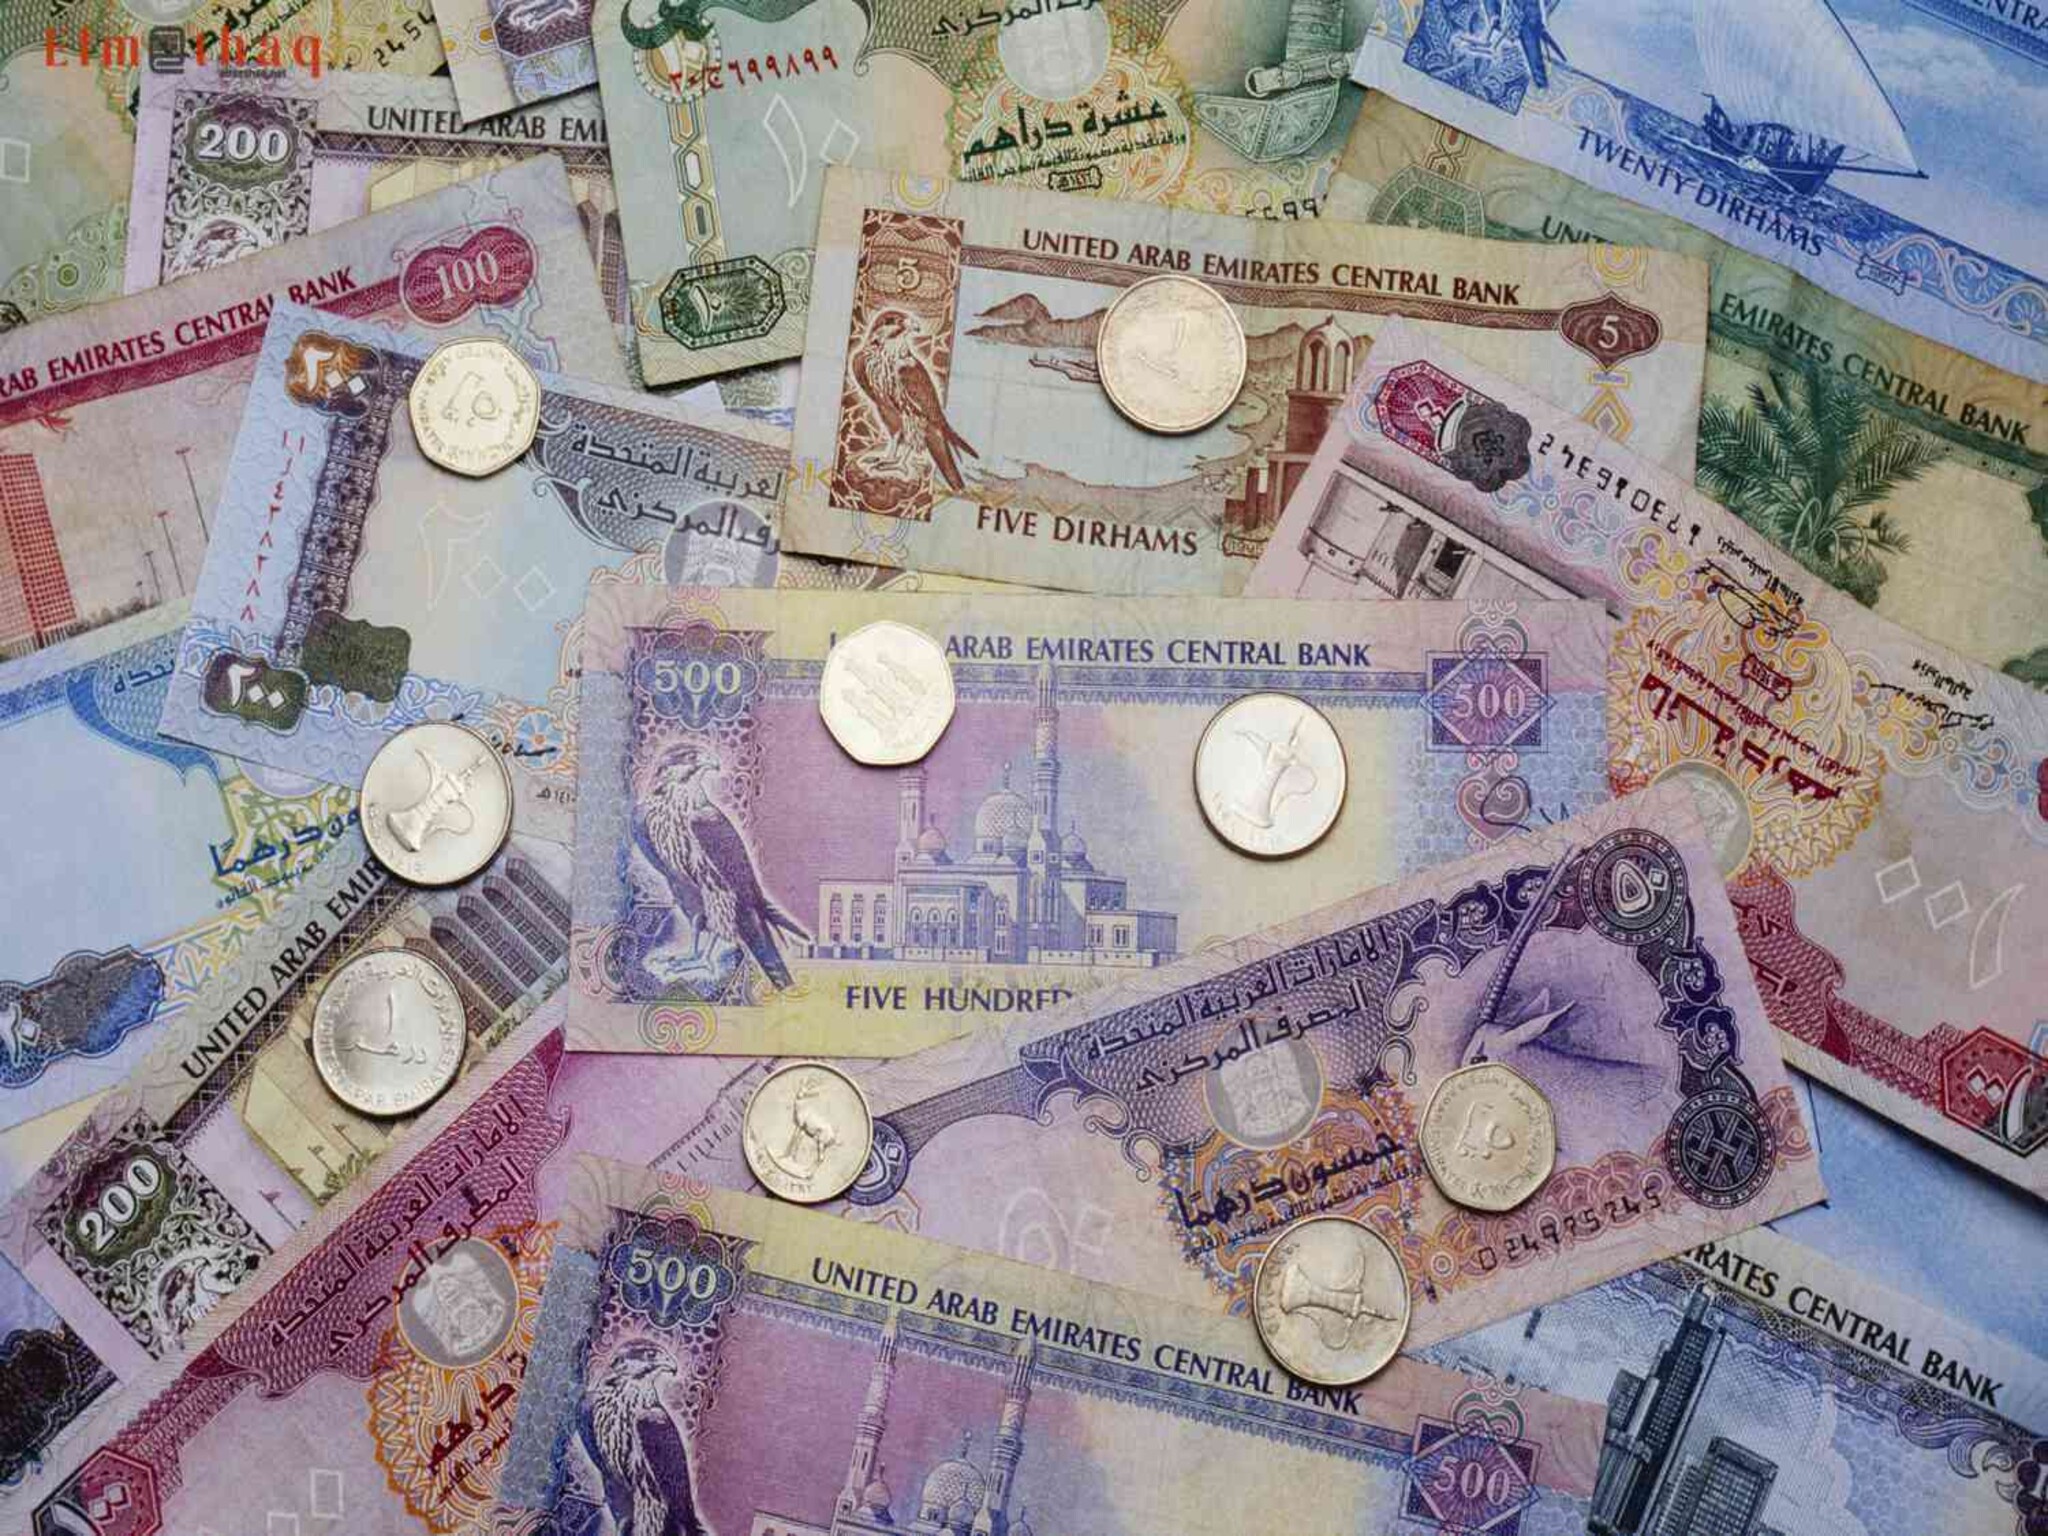 UAE unveils the deadline date for emiratisation targets in private firms